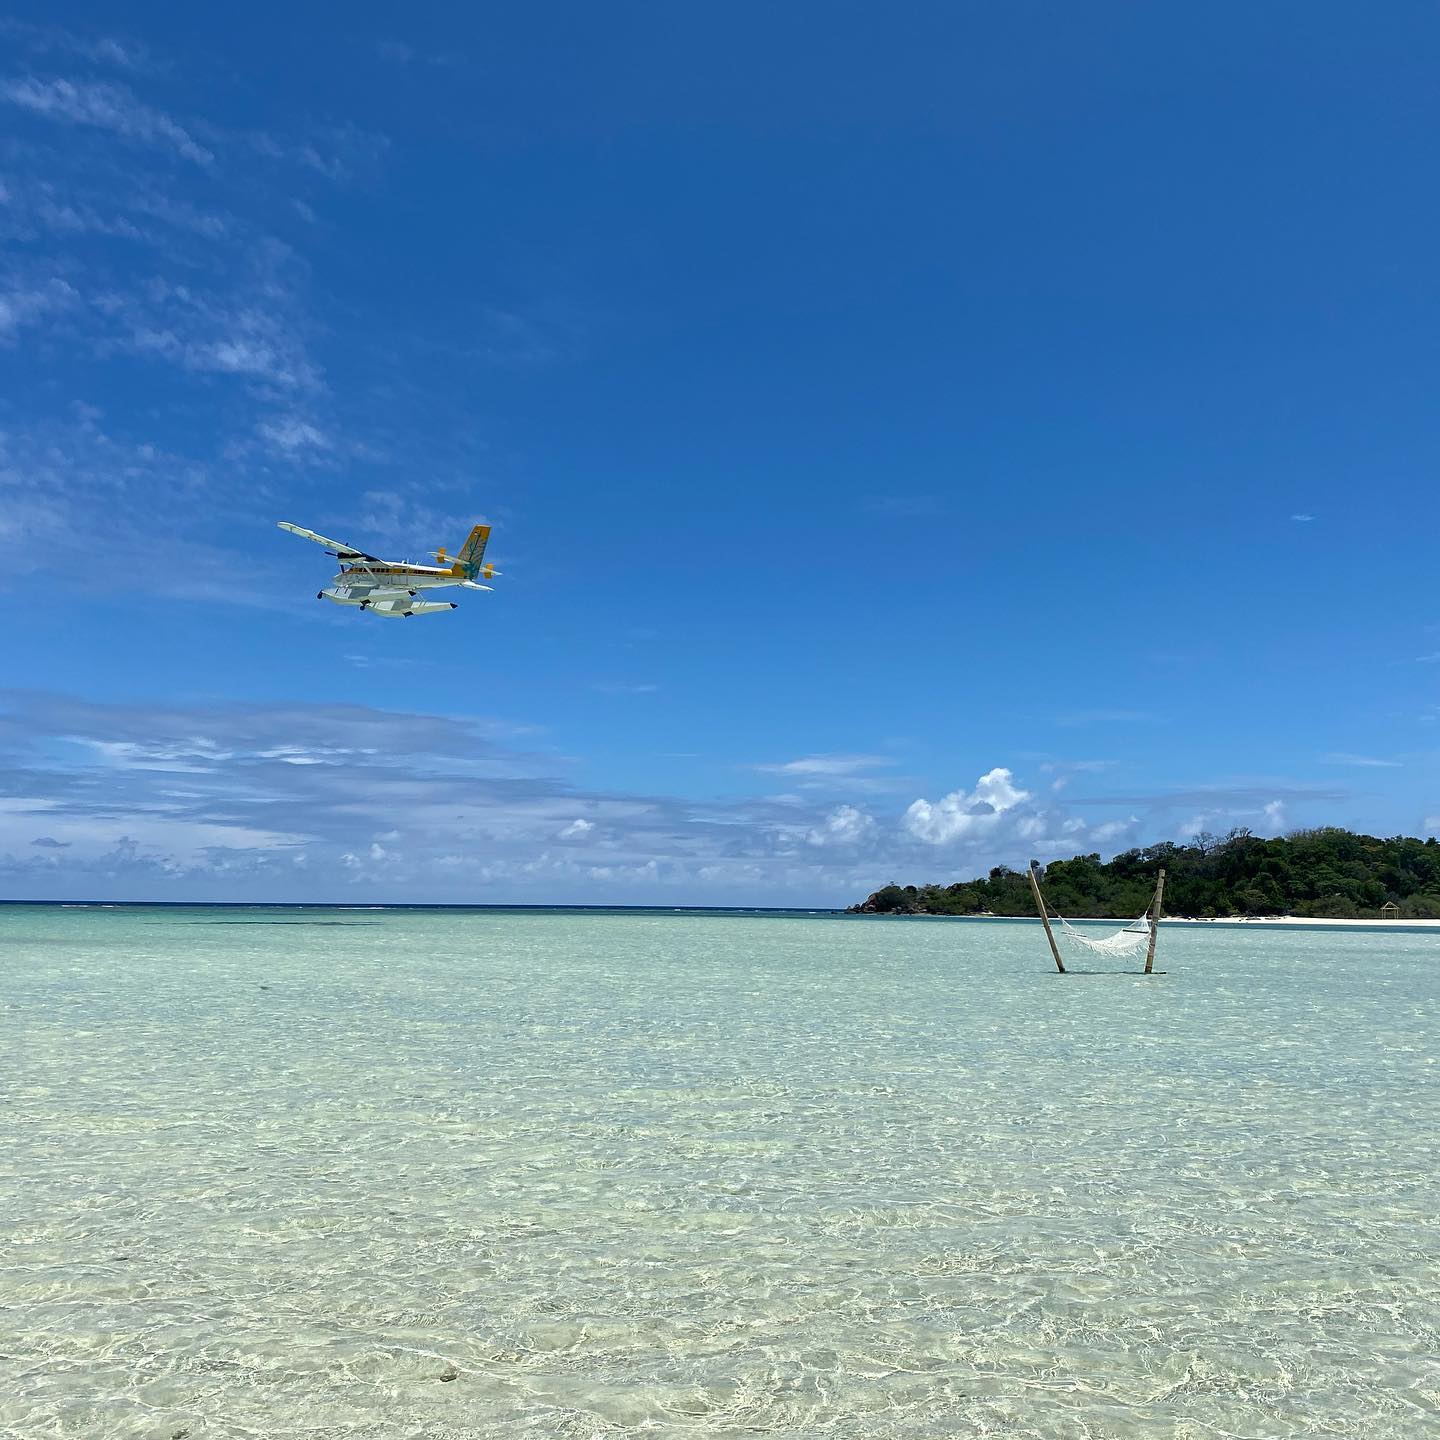 Seaplane flying over shallow water